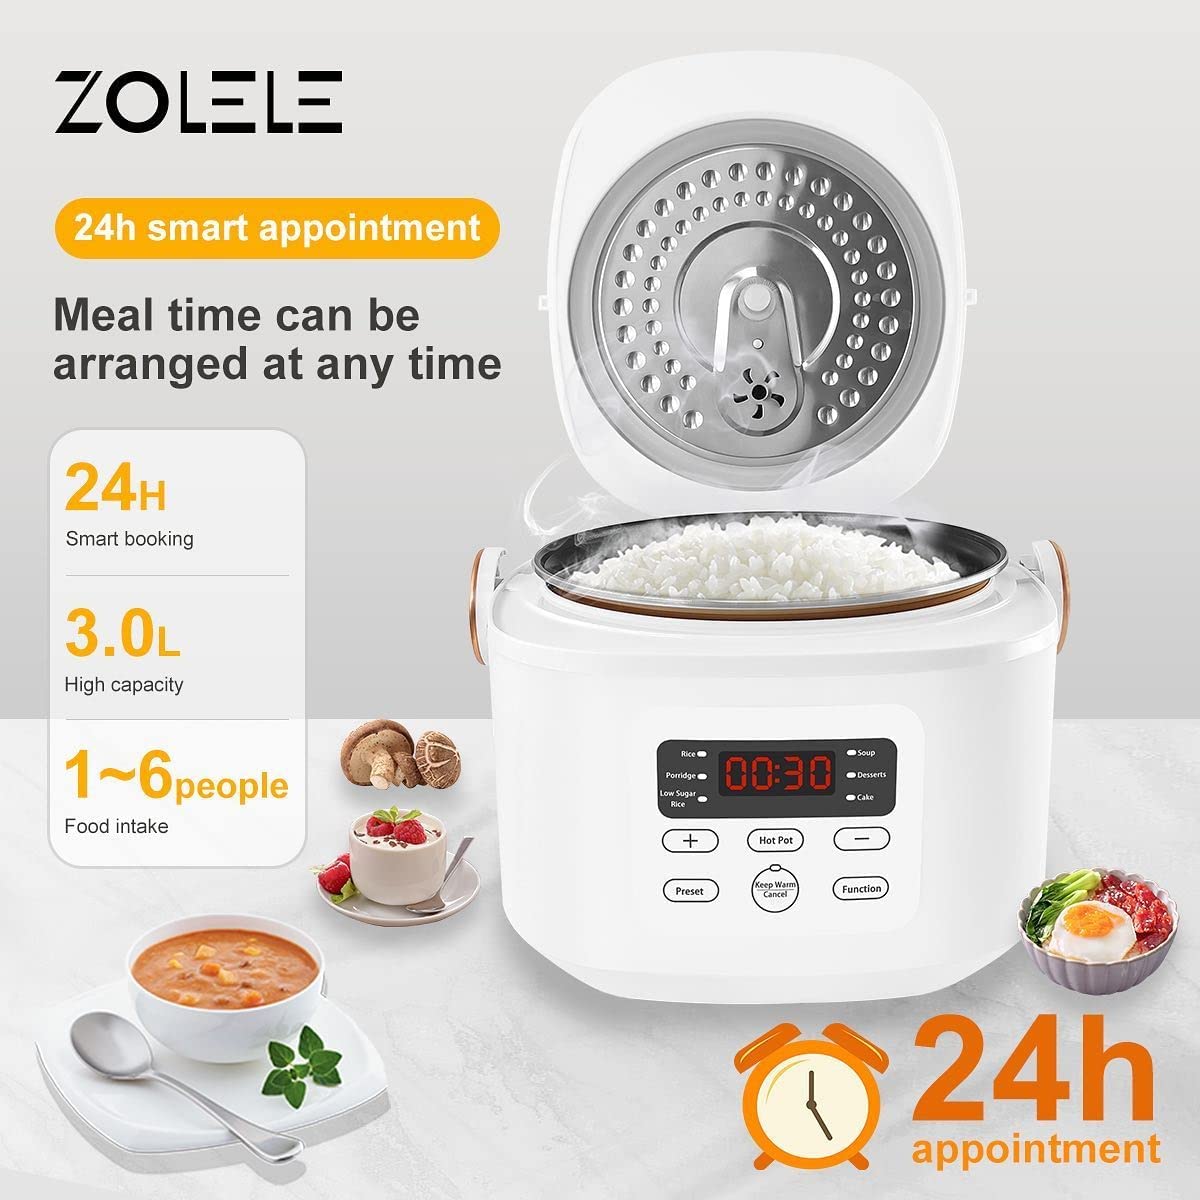 Zolele ZB500 Multifunctional Electric Rice Cooker With 3L Capacity ...